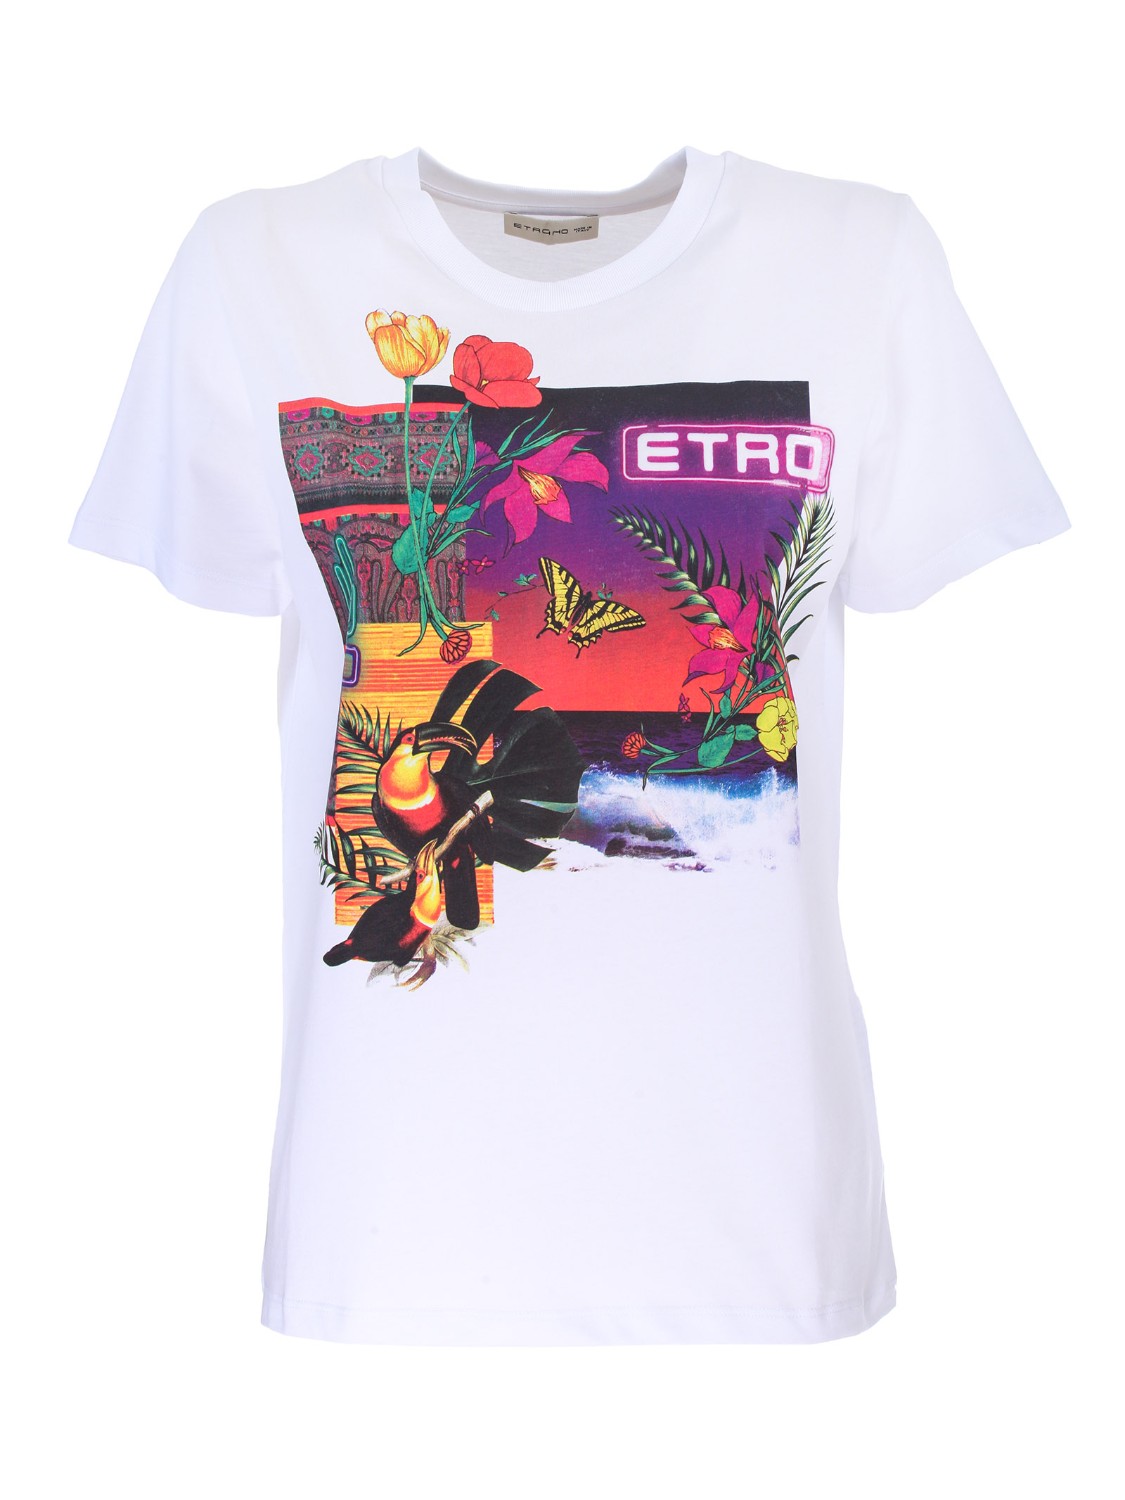 shop ETRO  T-shirt: Etro T-shirt in cotone con stampa.
Regular fit.
Maniche corte.
Made in Italy.
Composizione: 100% cotone.. 15142 9705-0990 number 500266